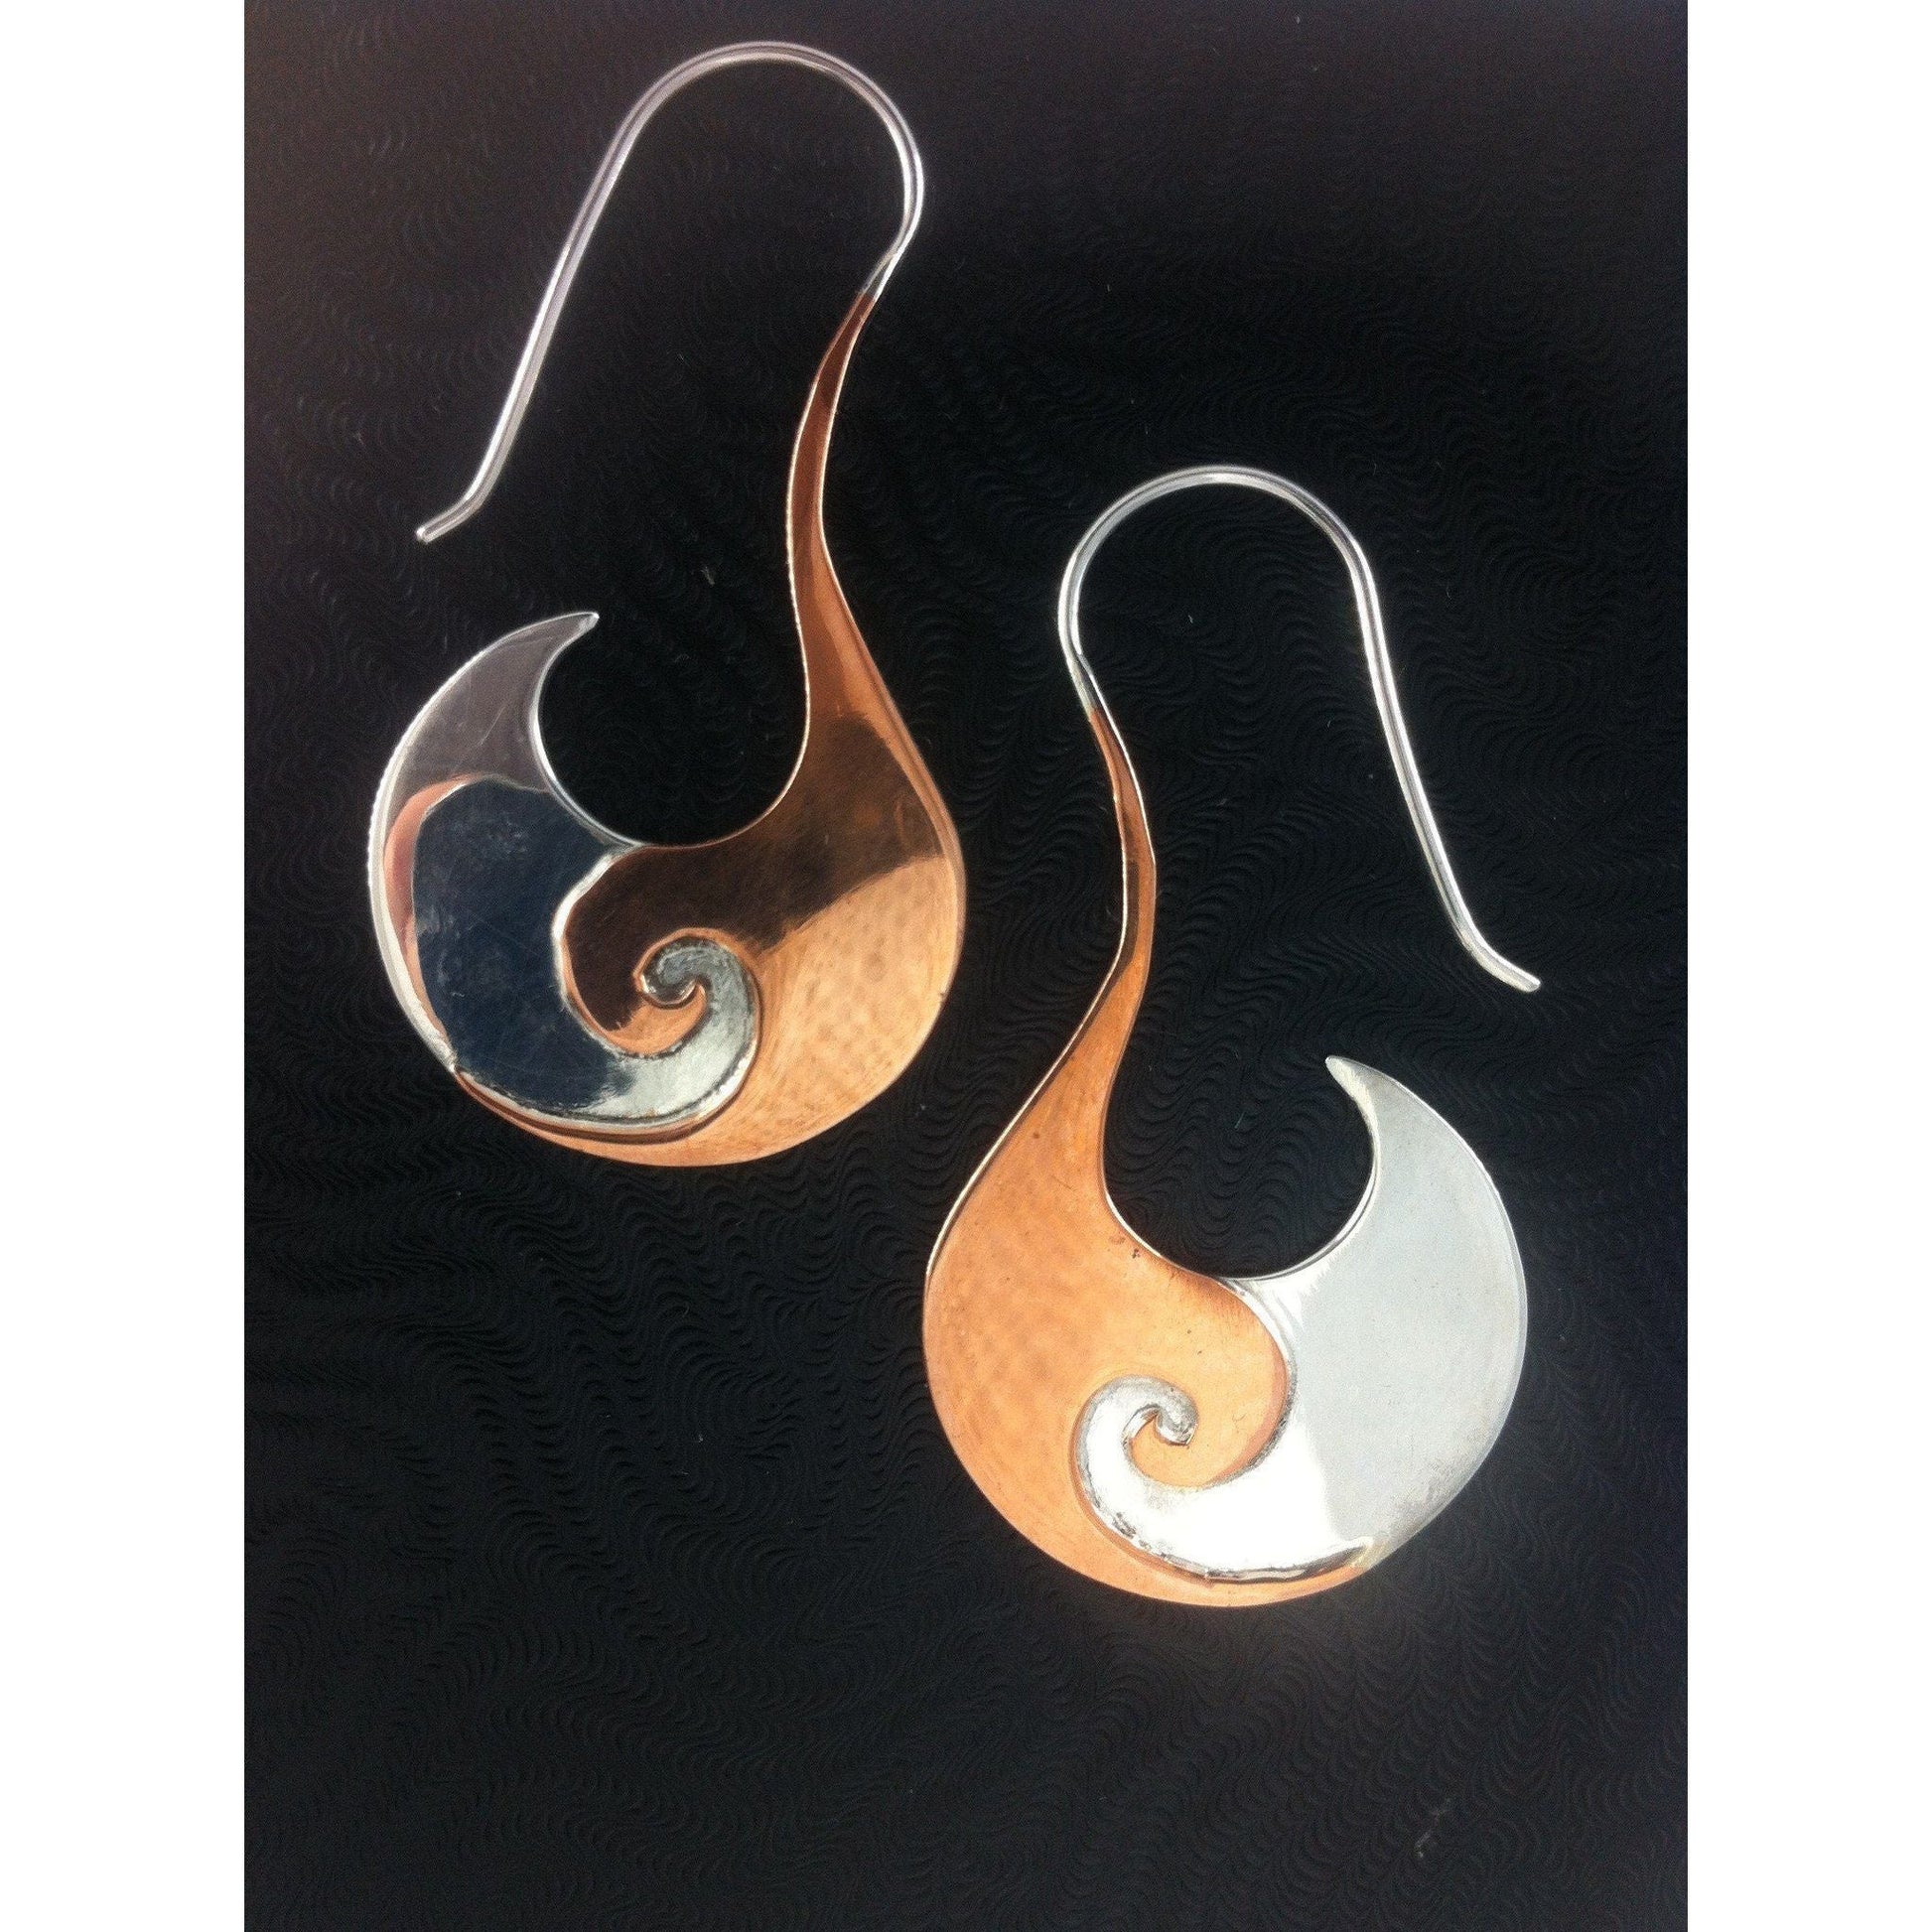 Tribal Earrings :|: Balance. sterling silver with copper highlights earrings.